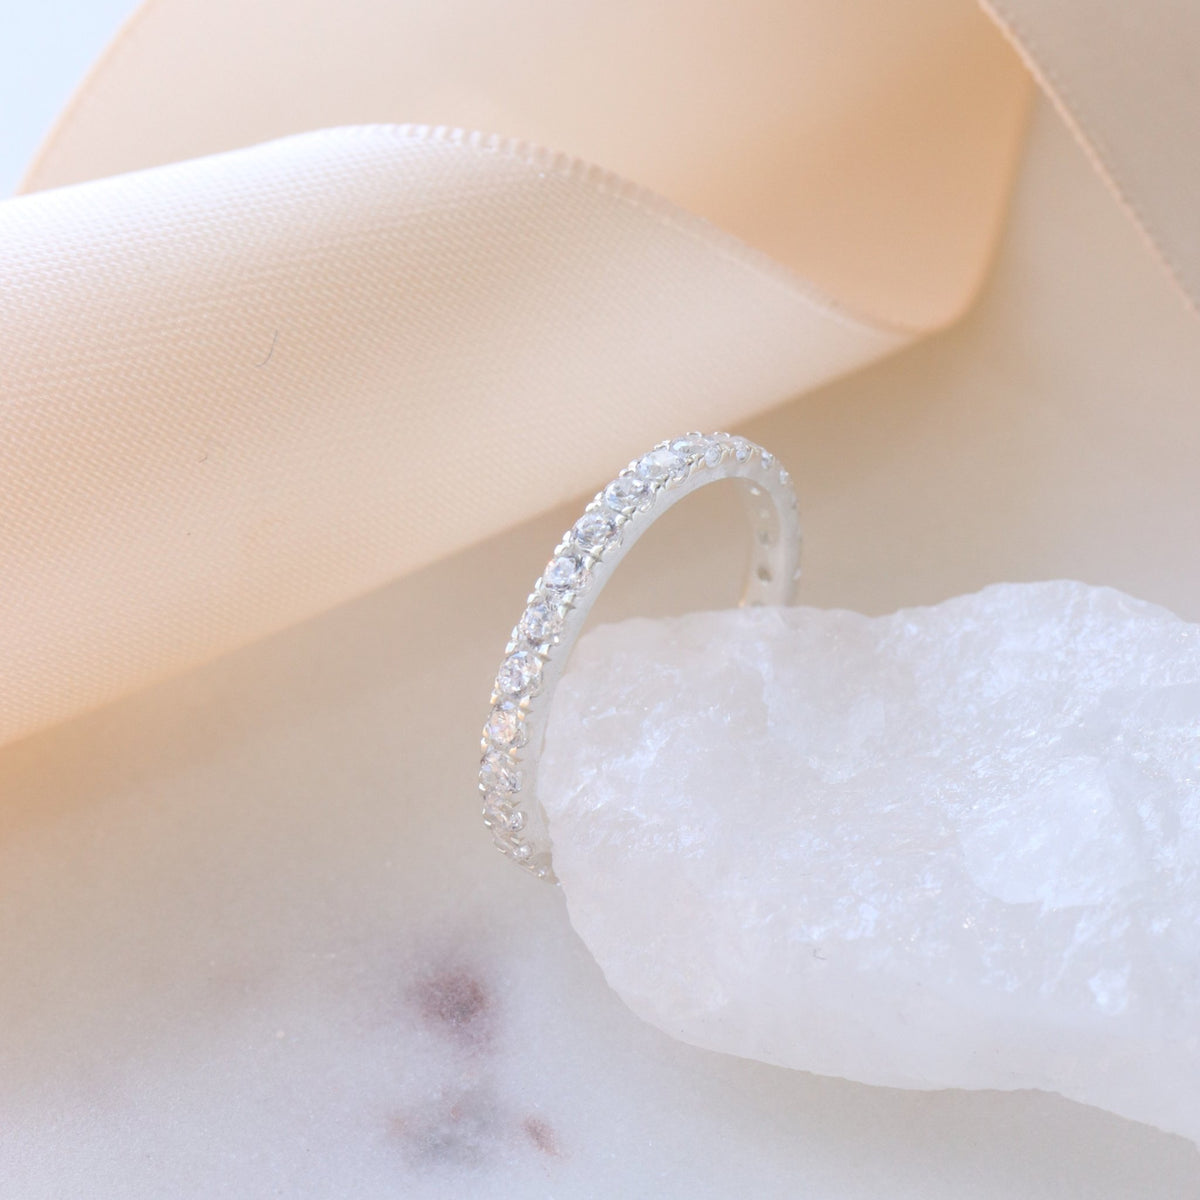 LOVE ETERNITY BAND - CUBIC ZIRCONIA &amp; SILVER - SO PRETTY CARA COTTER